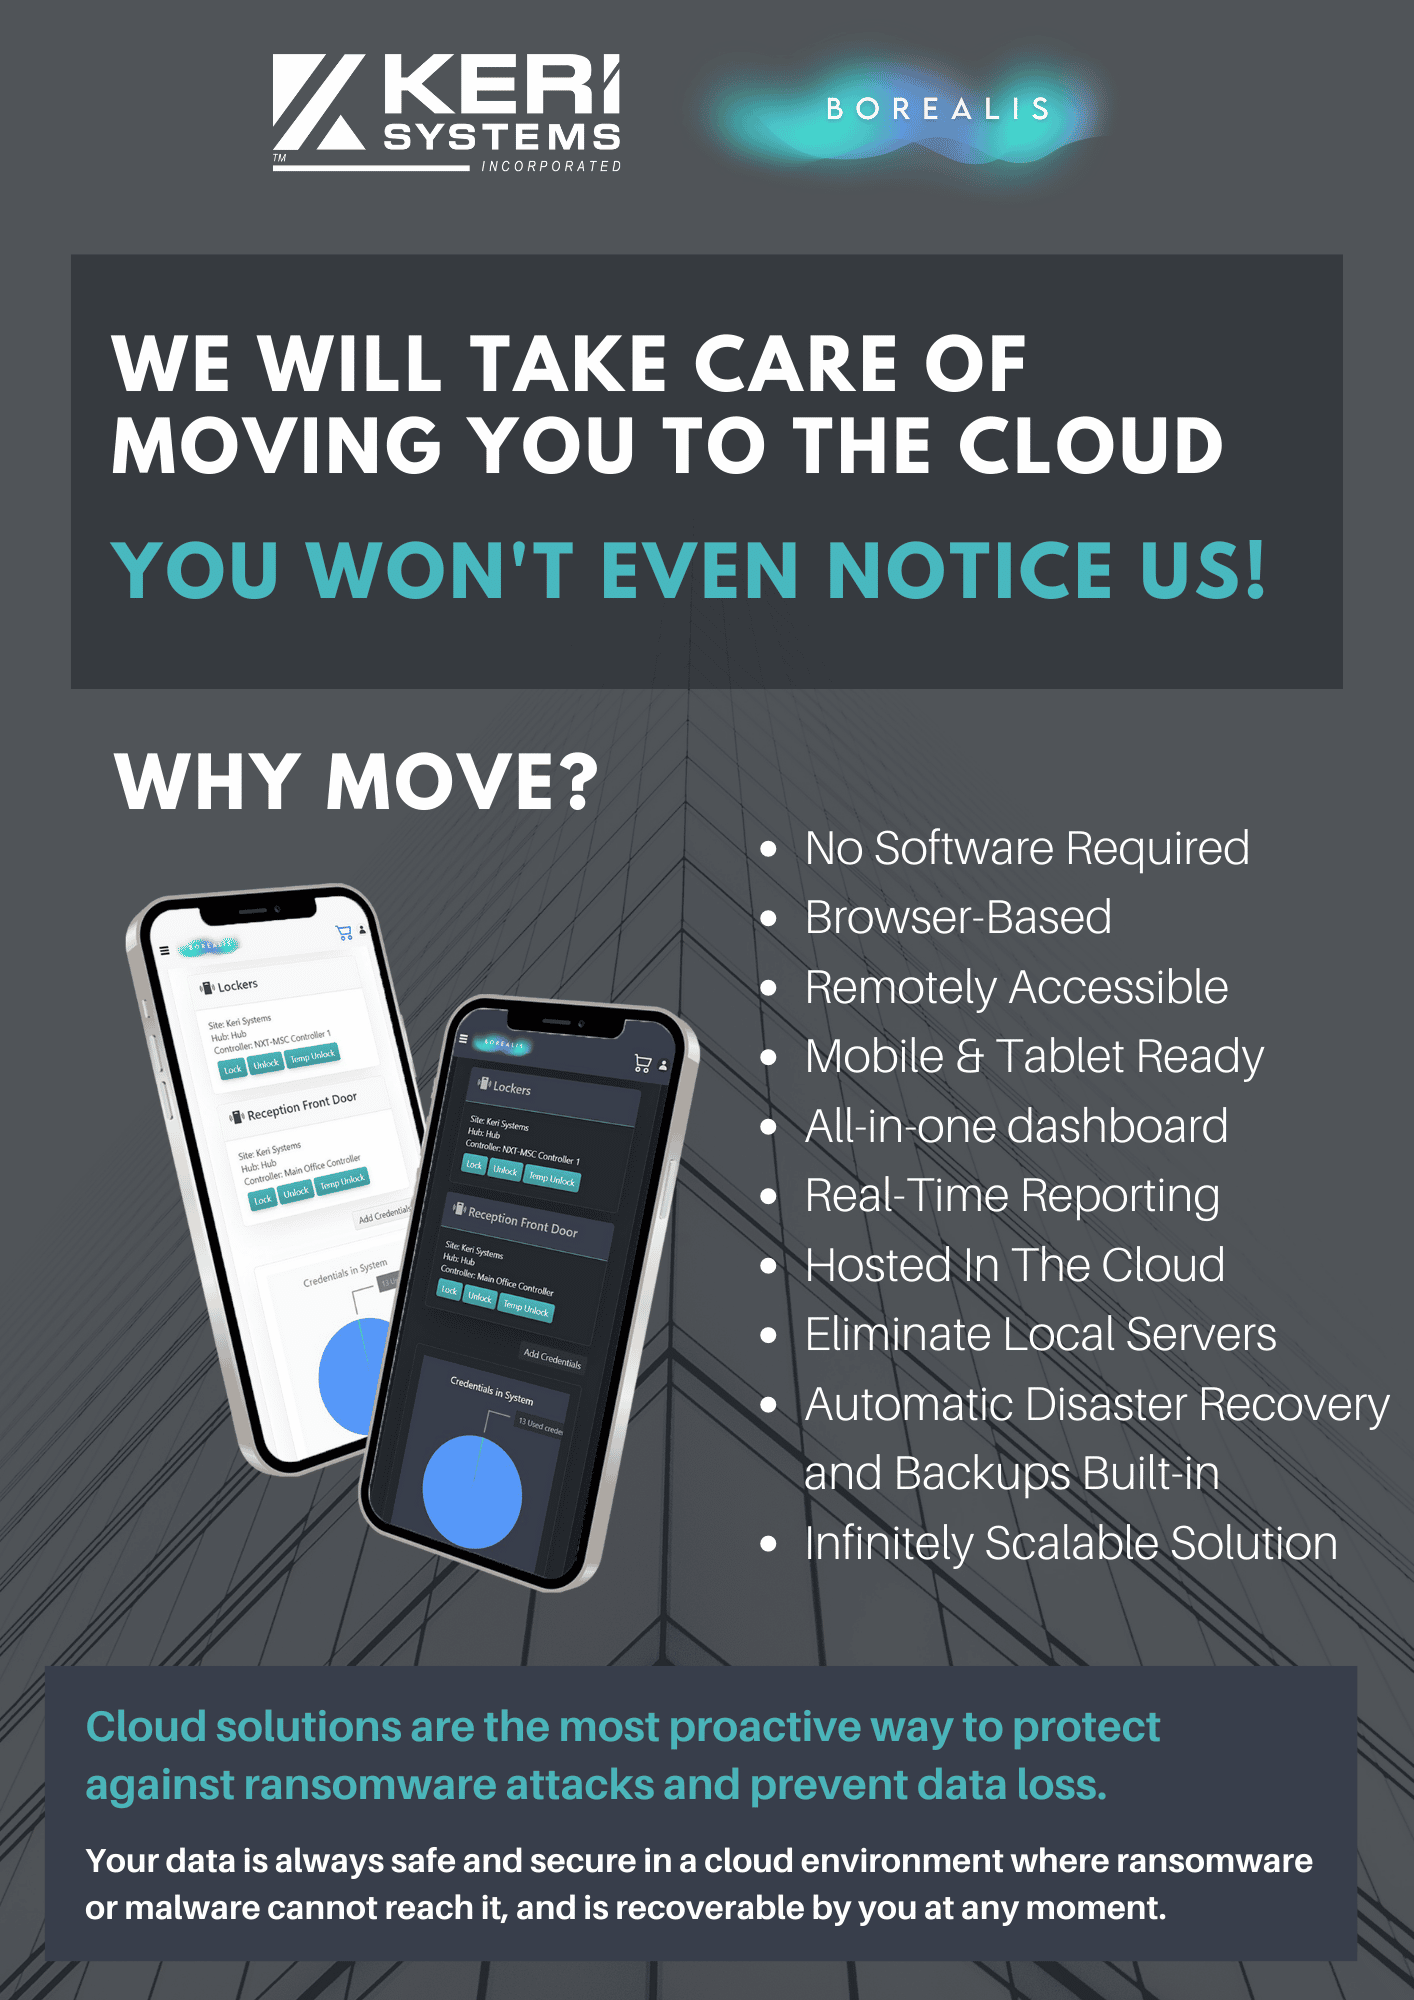 We will take care of moving you to the cloud